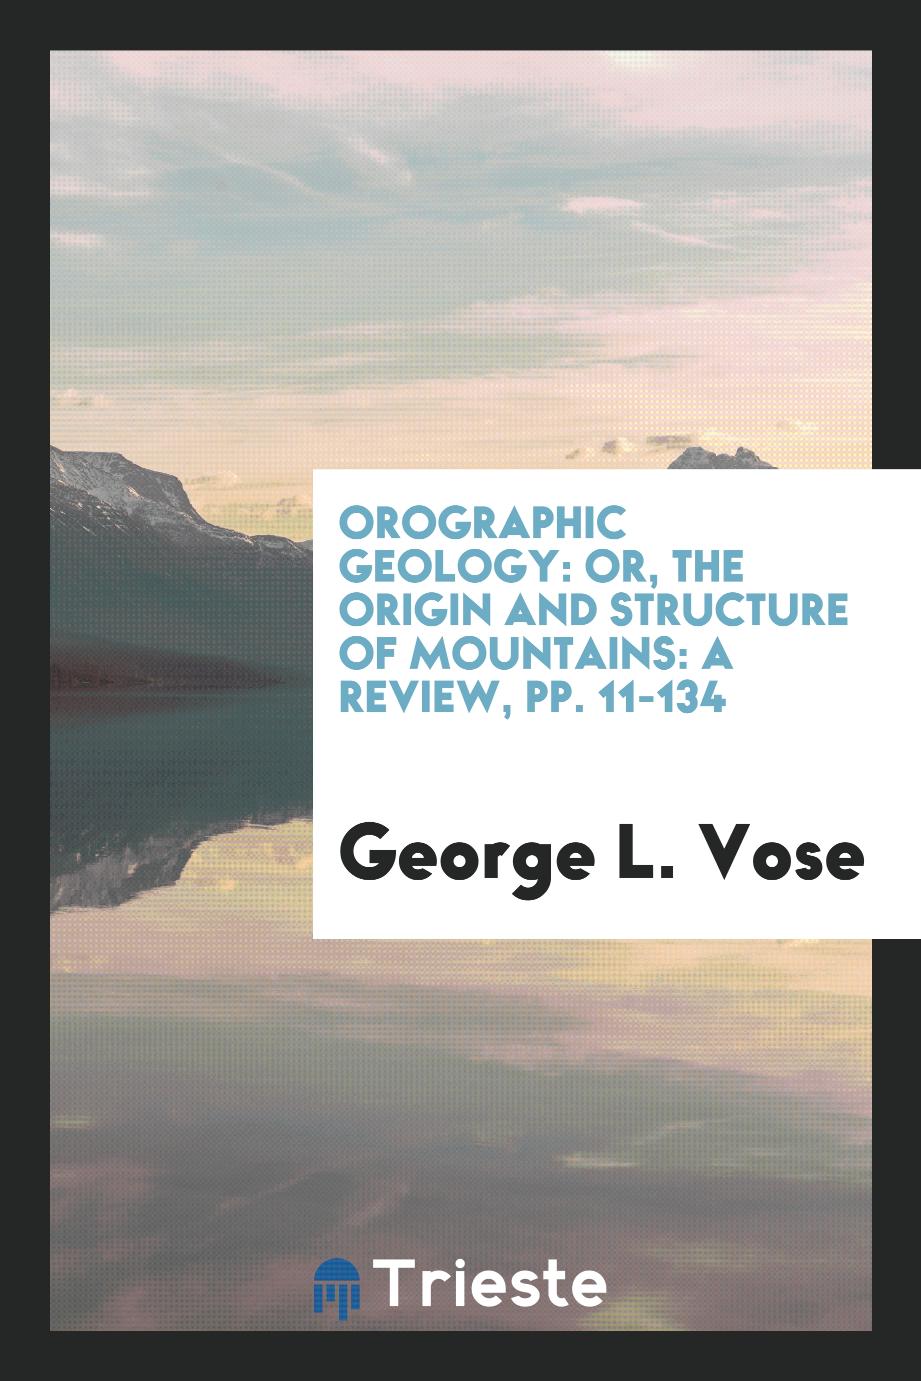 Orographic Geology: Or, the Origin and Structure of Mountains: A Review, pp. 11-134